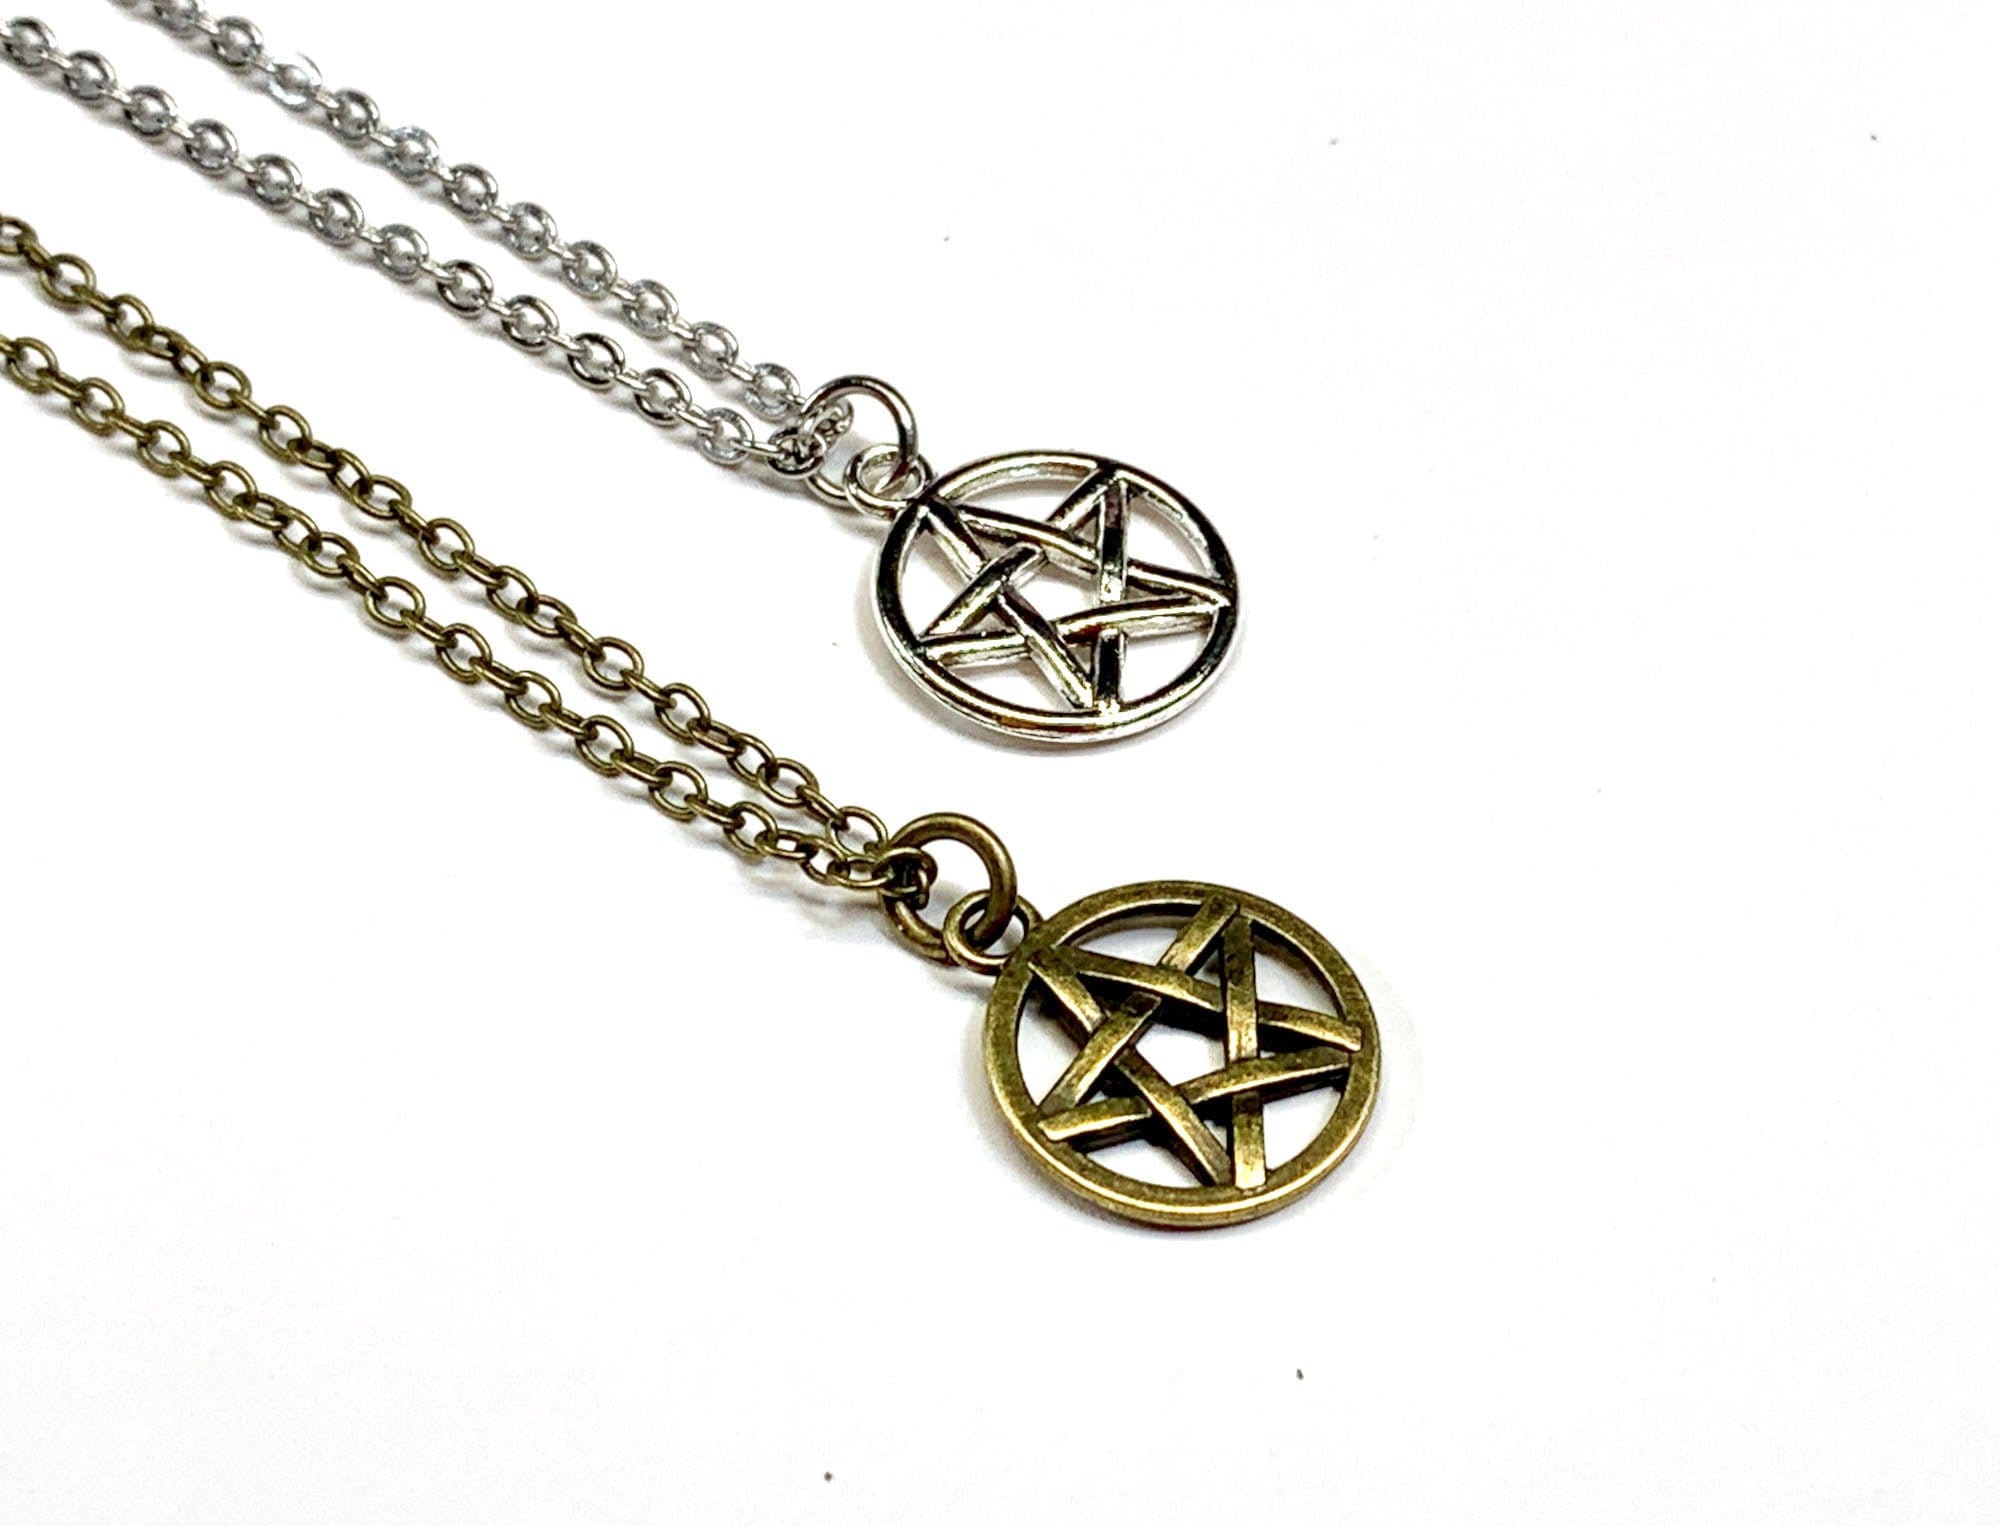 Pagan Wicca Jewelry Small Pentacle Necklace Simple Small Pentagram Necklace Silver Pentagram Necklace Wiccan Handmade Jewelry